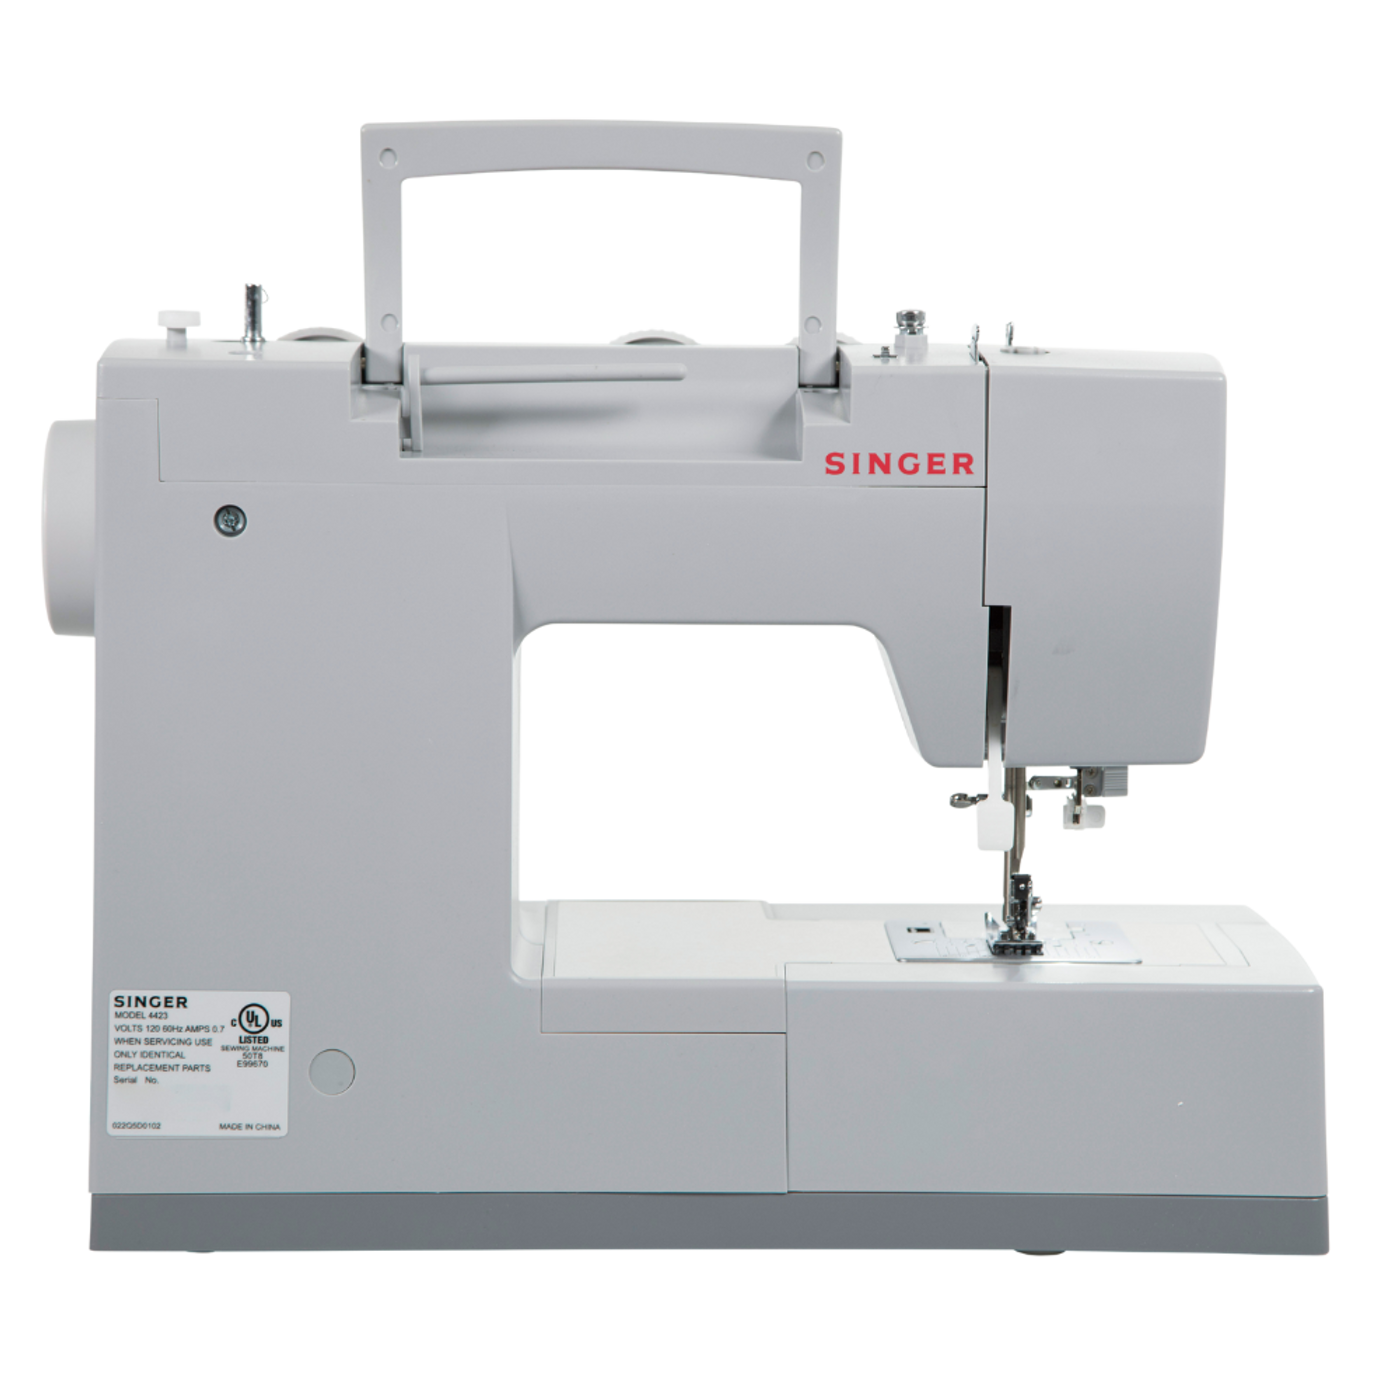 SINGER Heavy Duty Sewing Machine With Included Accessory Kit